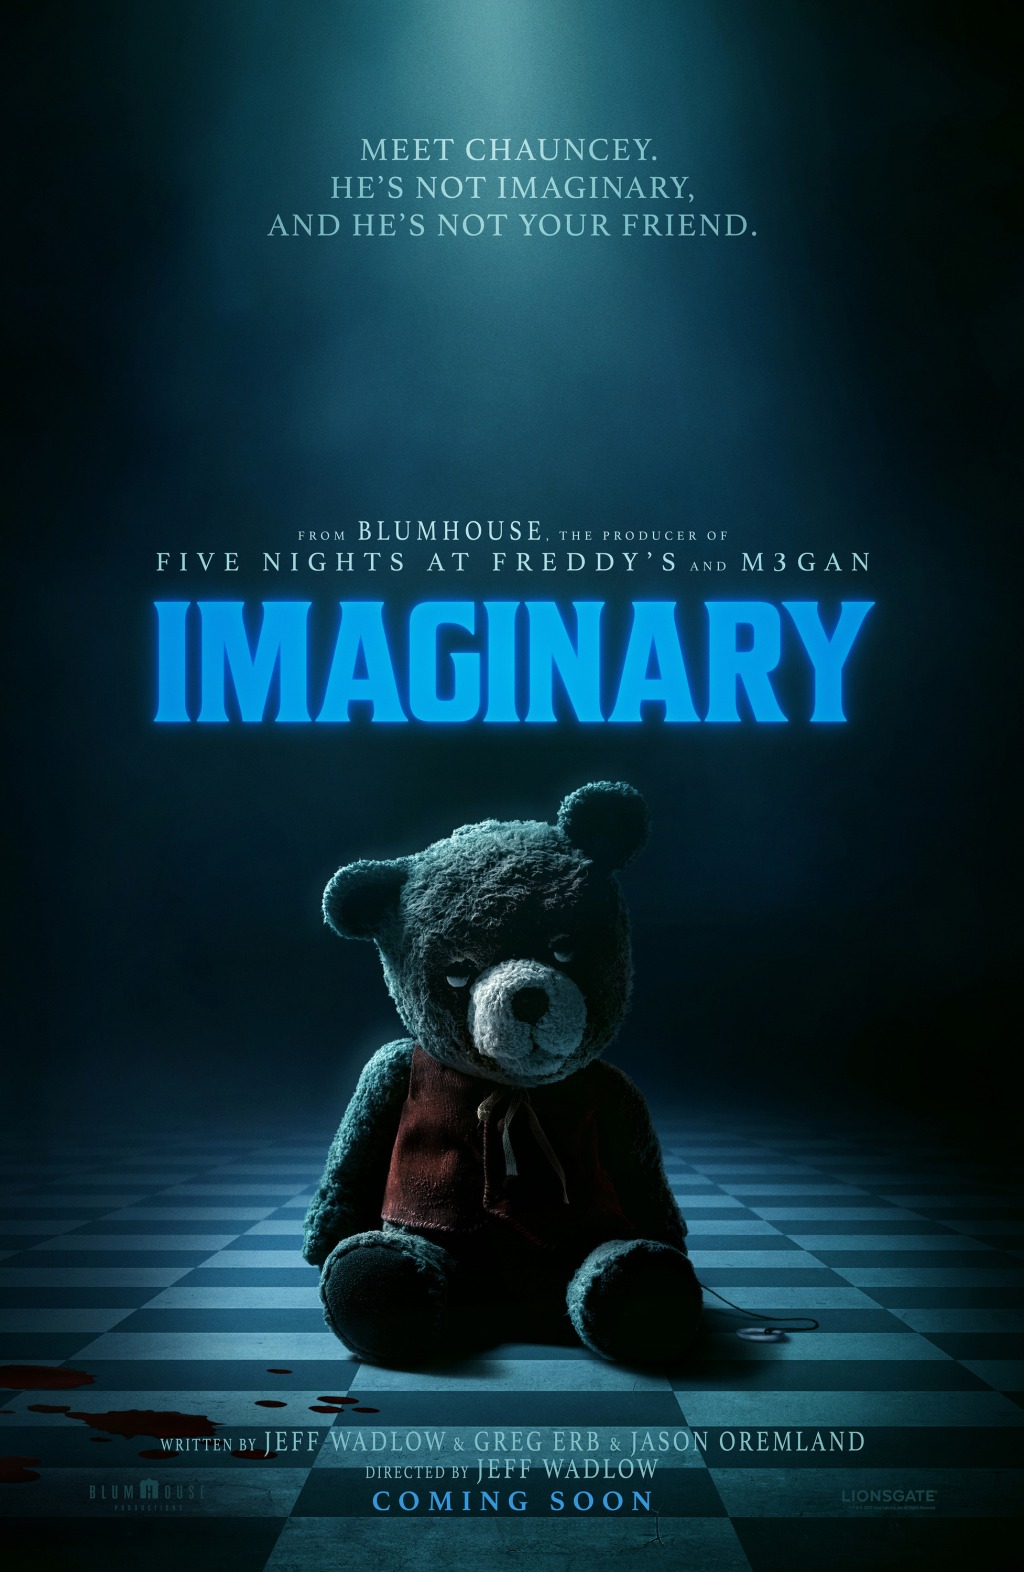 Imaginary Review — A solid entry horror film for younger viewers